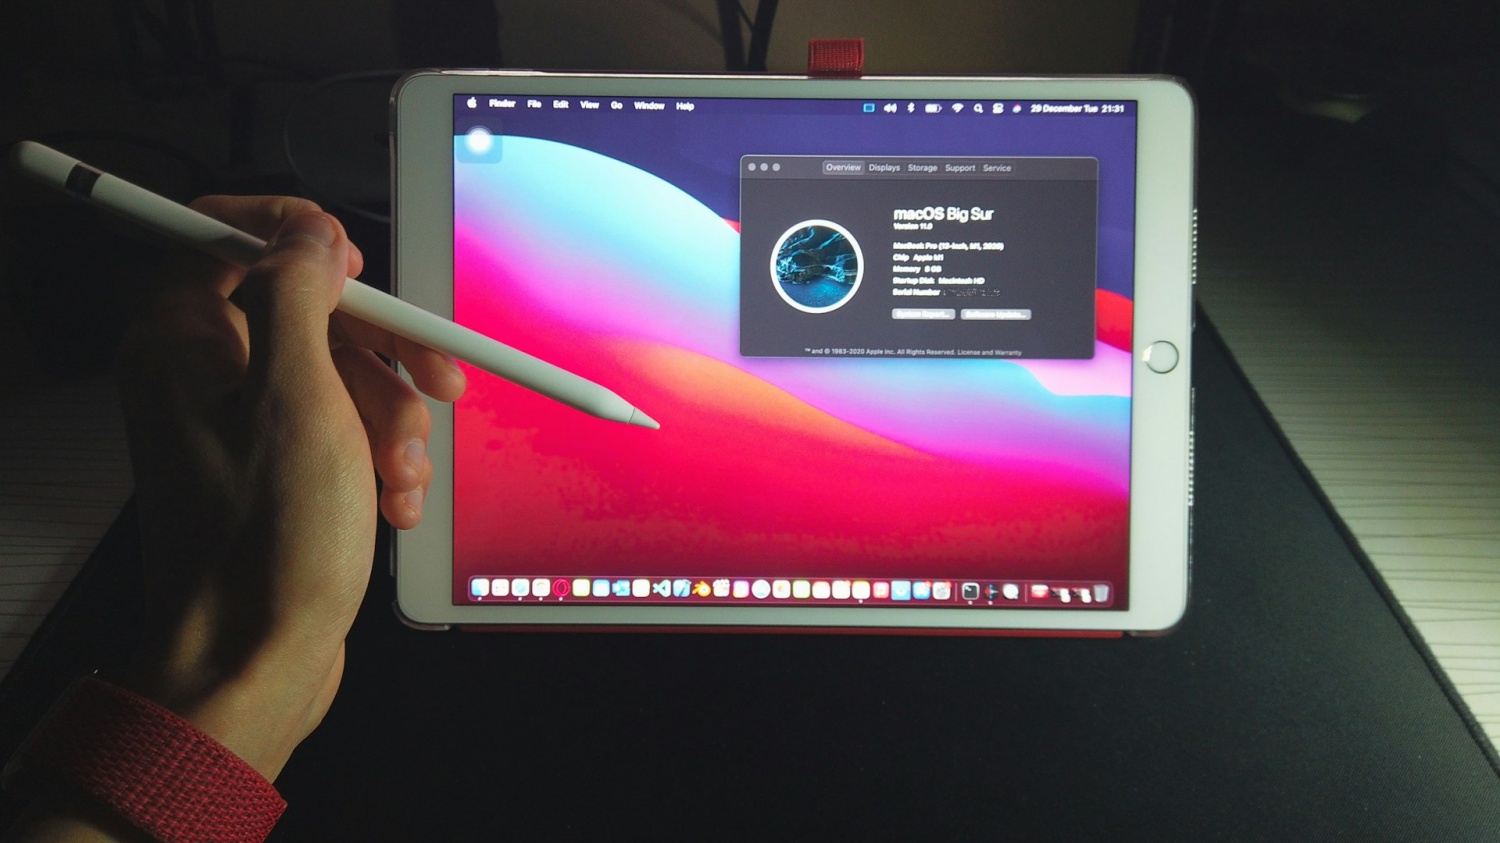 [RUMOR] Upcoming iPad Pro is Getting Matte Display Option For the First Time